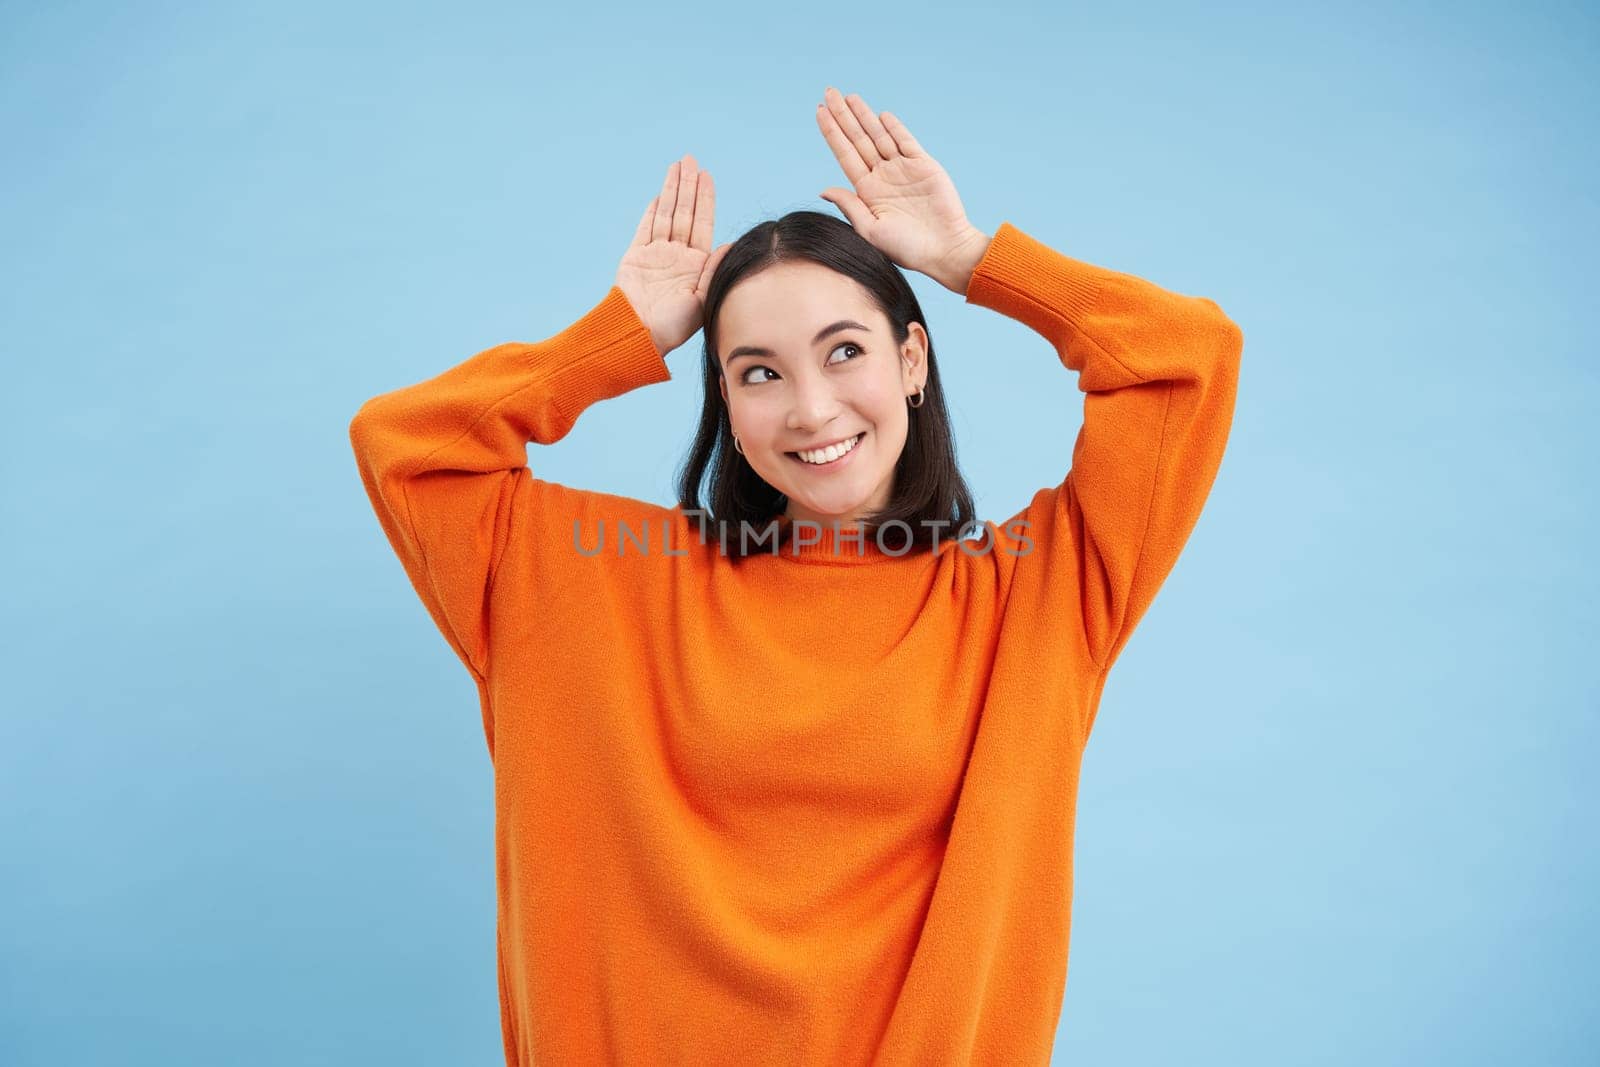 Funny and cute young asian woman shows bunny ears gesture on top of her head and smiling, dancing and showing grimaces, blue background.